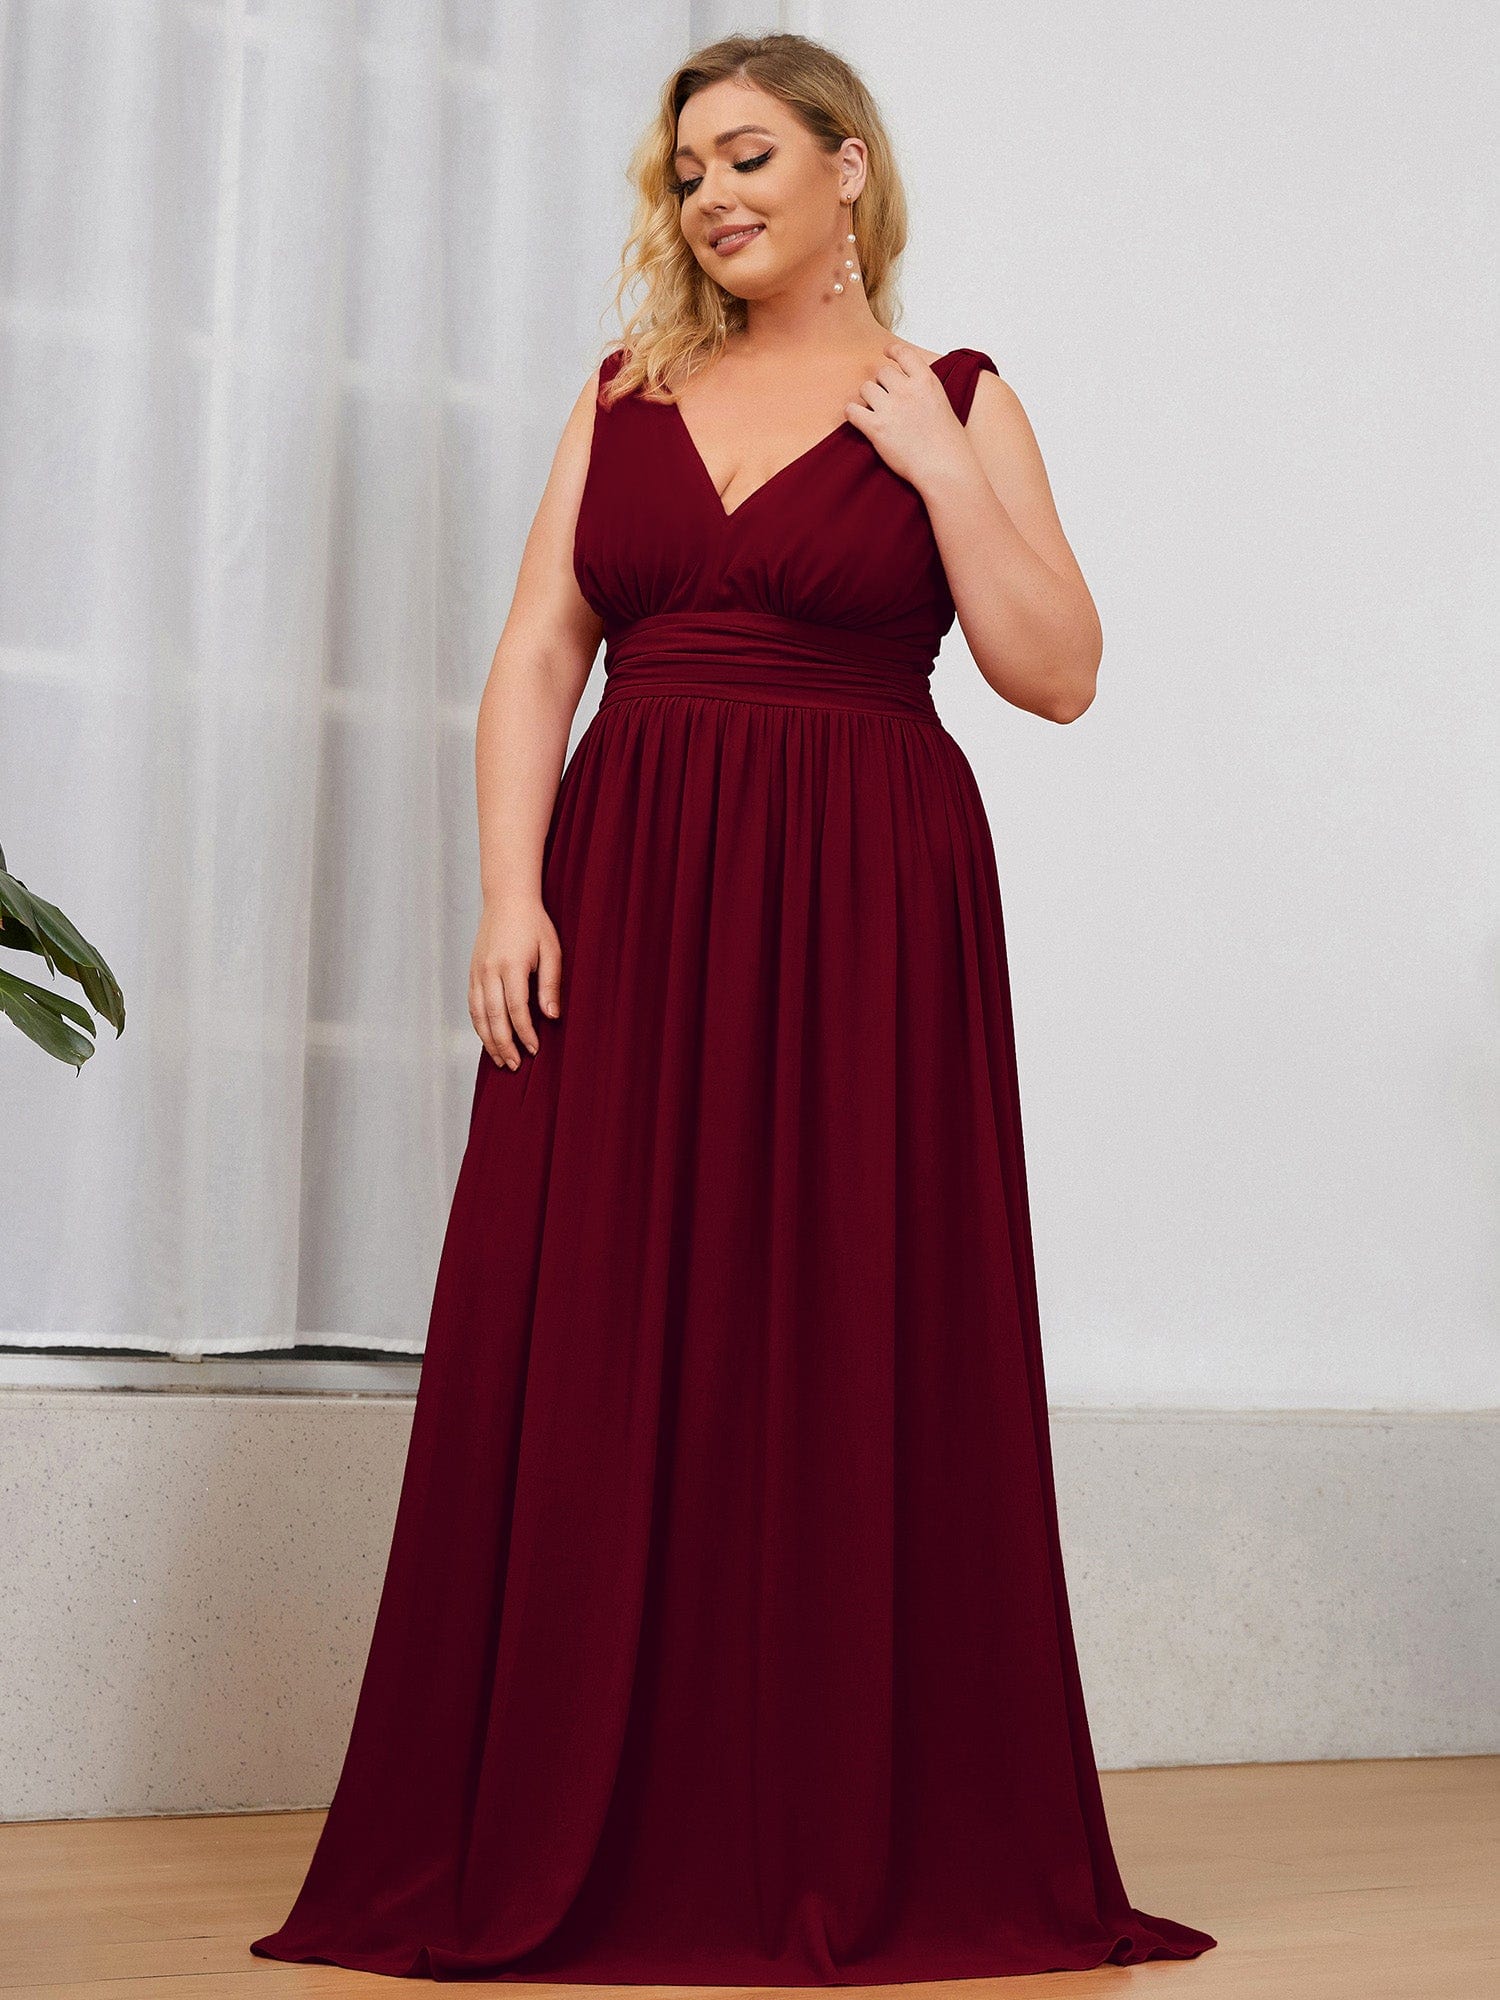 Shop Plus Mother of the Groom Dresses & Gowns - Ever-Pretty US